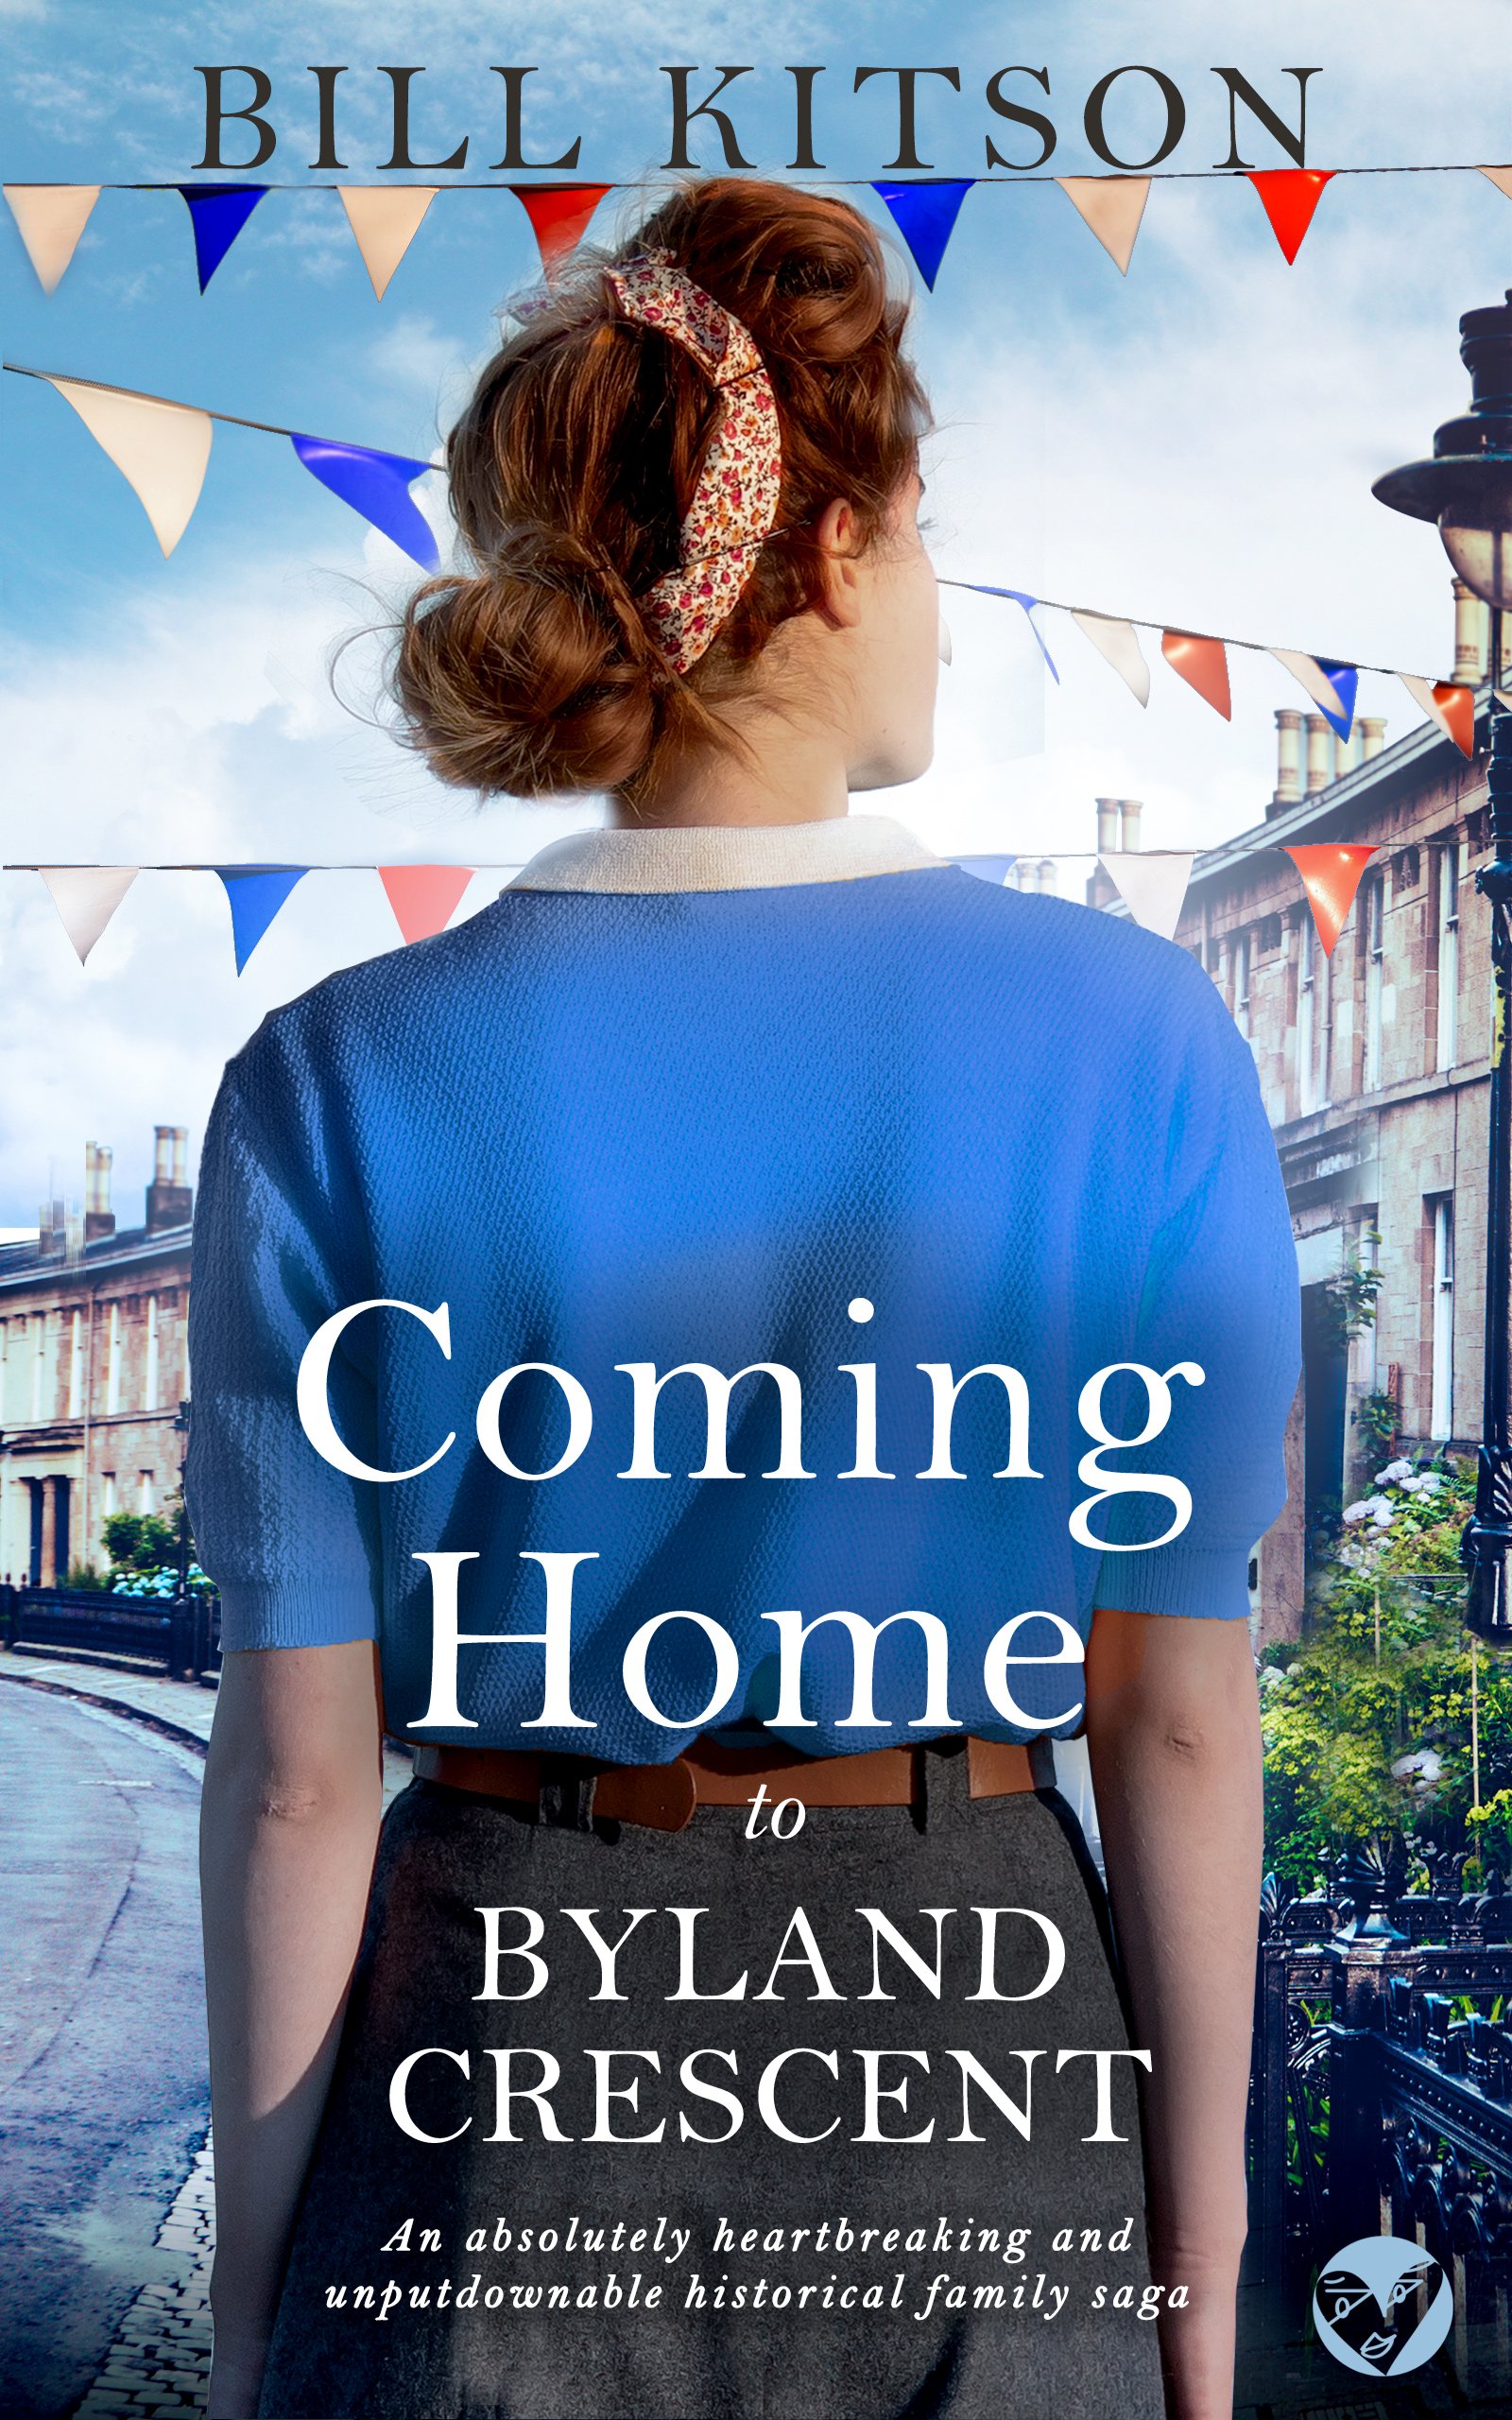 Coming Home Cover Publish.jpg